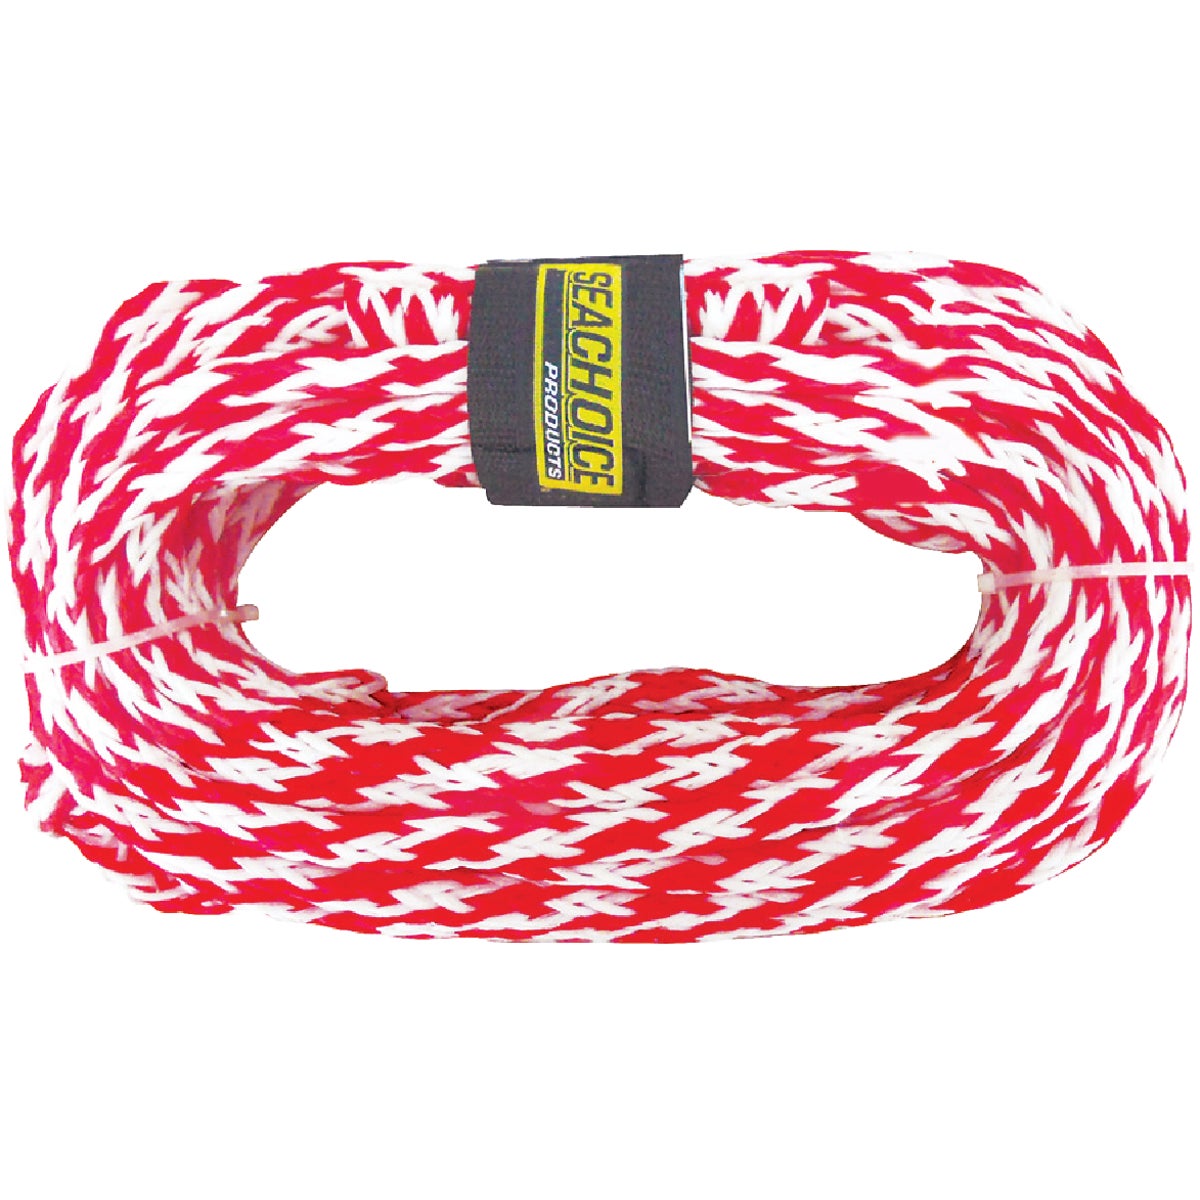 Item 574079, 2-rider inflatables tow rope.